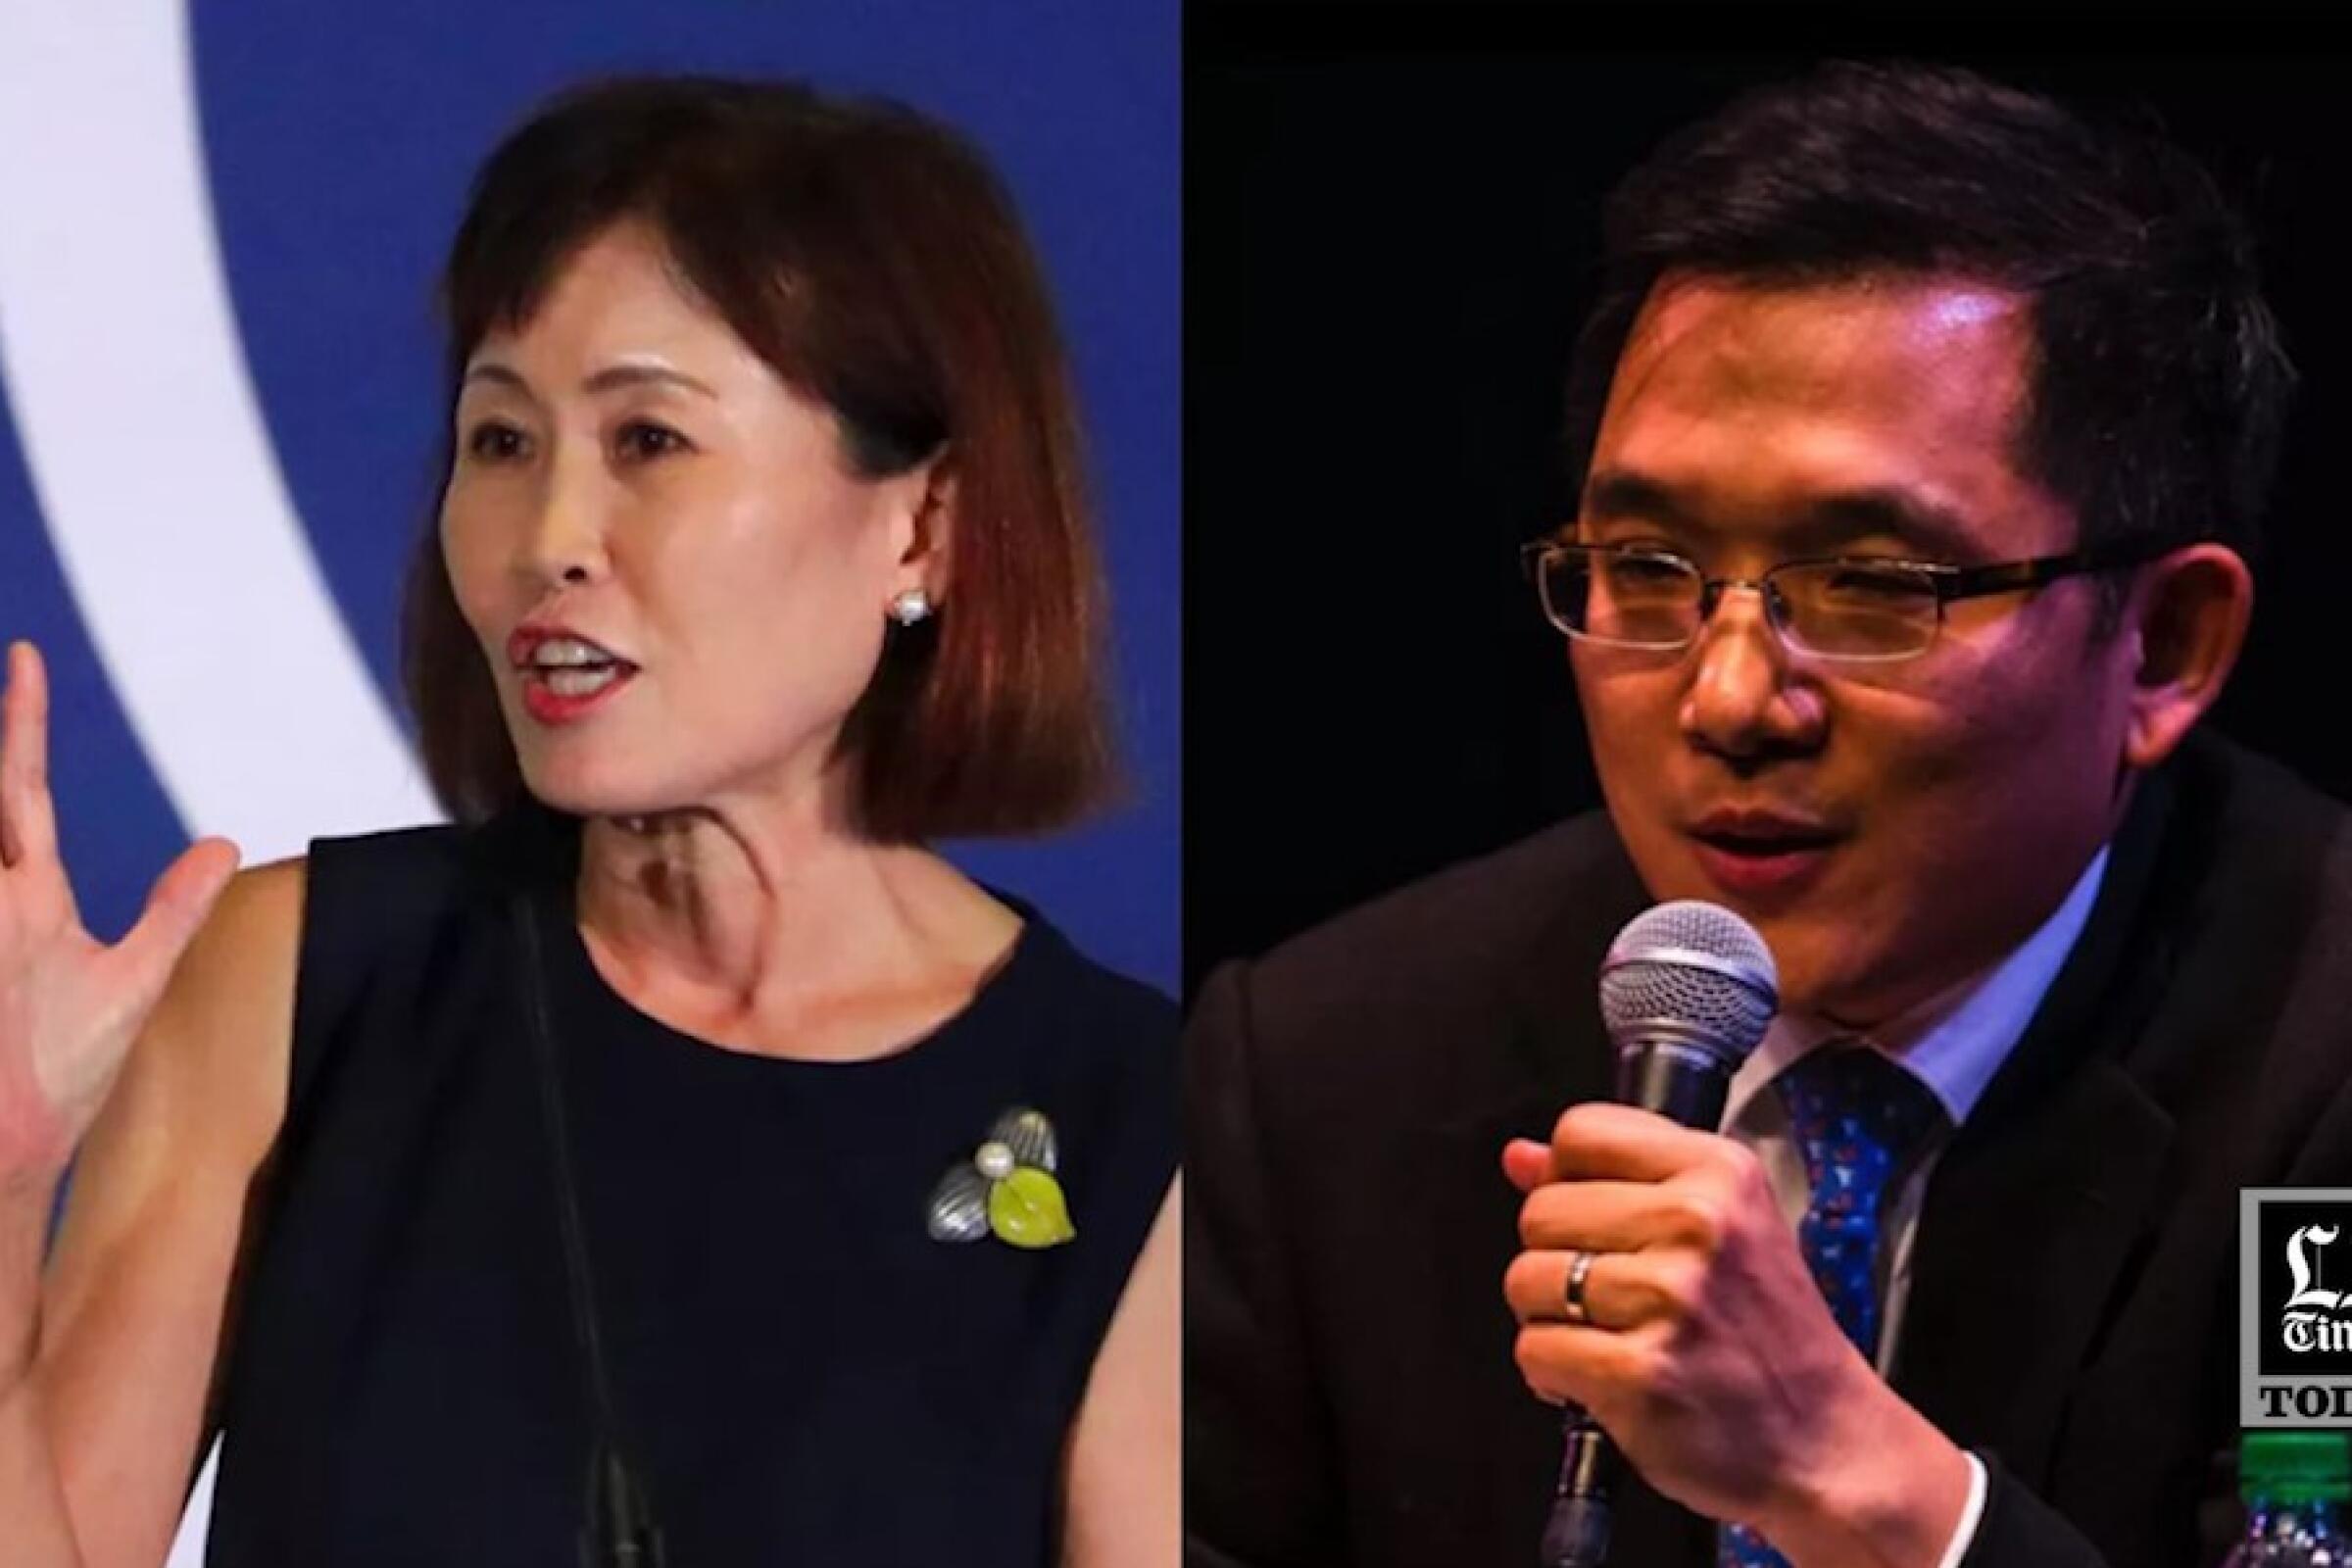 Rep. Michelle Steel, left, and Jay Chen are shown in separate photos.